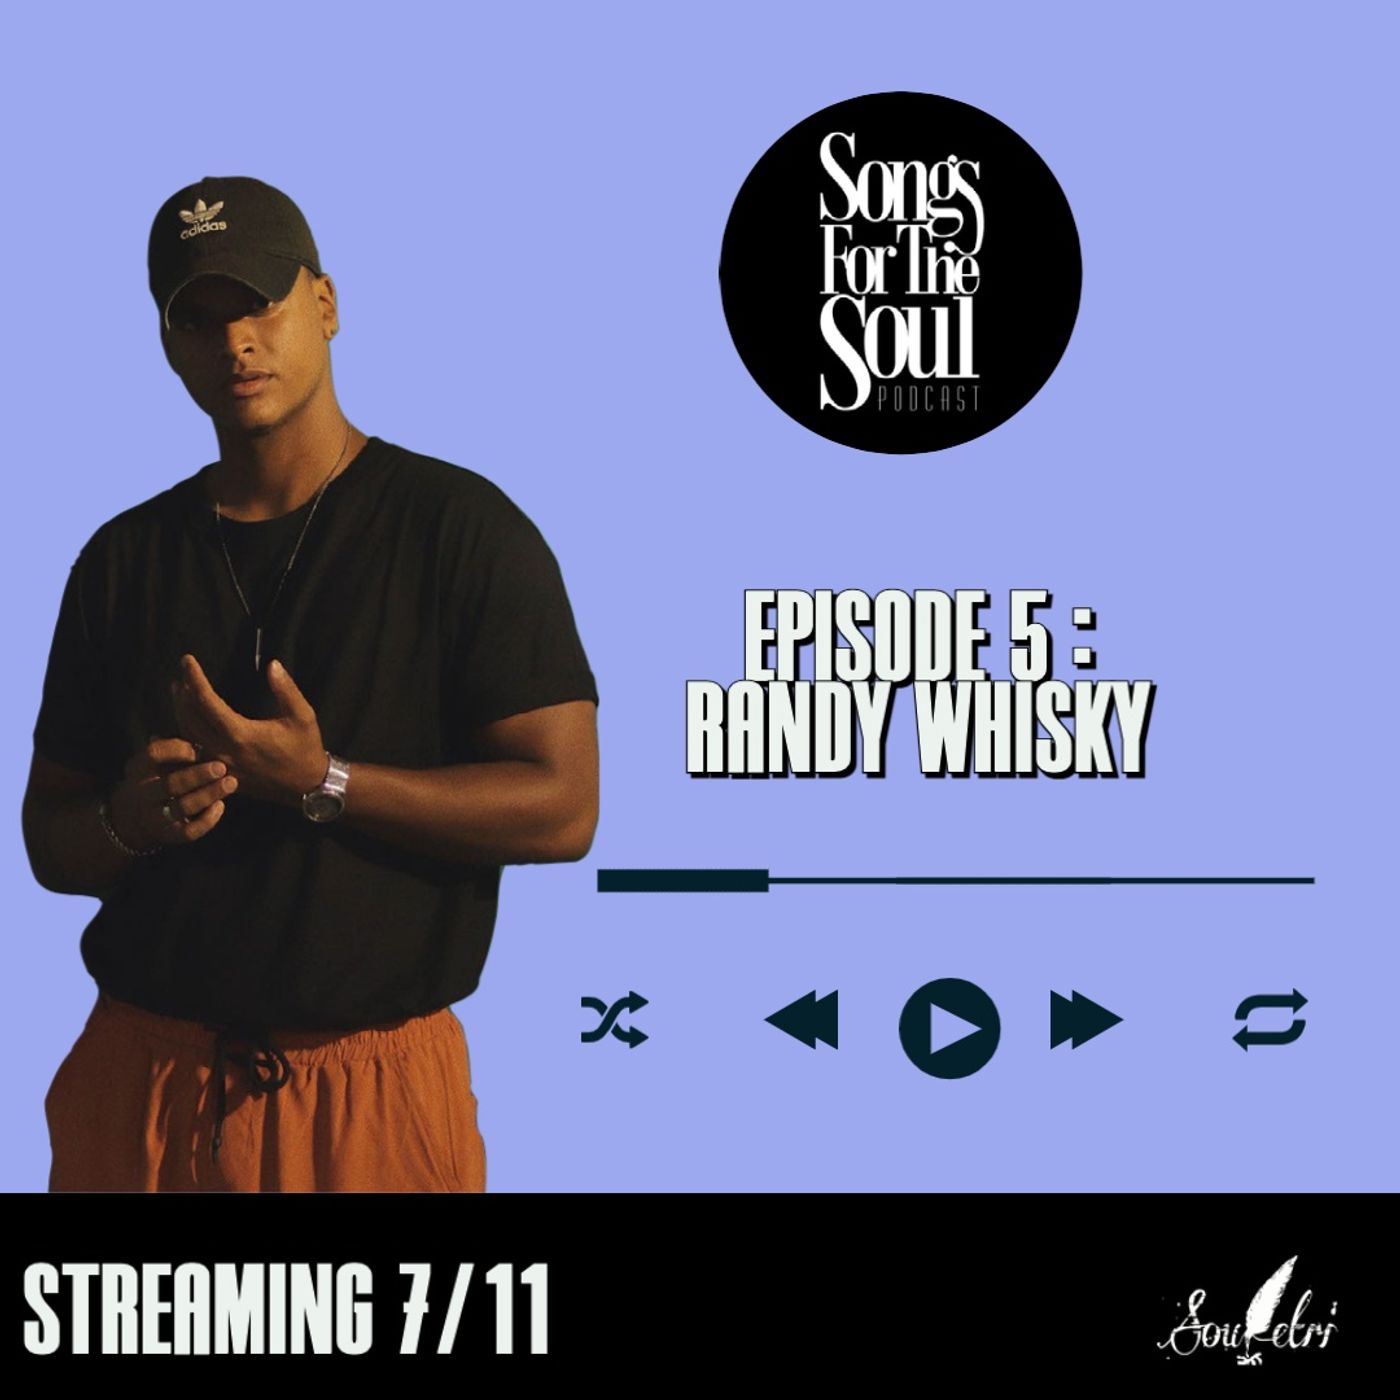 Songs for the Soul : Randy Whisky